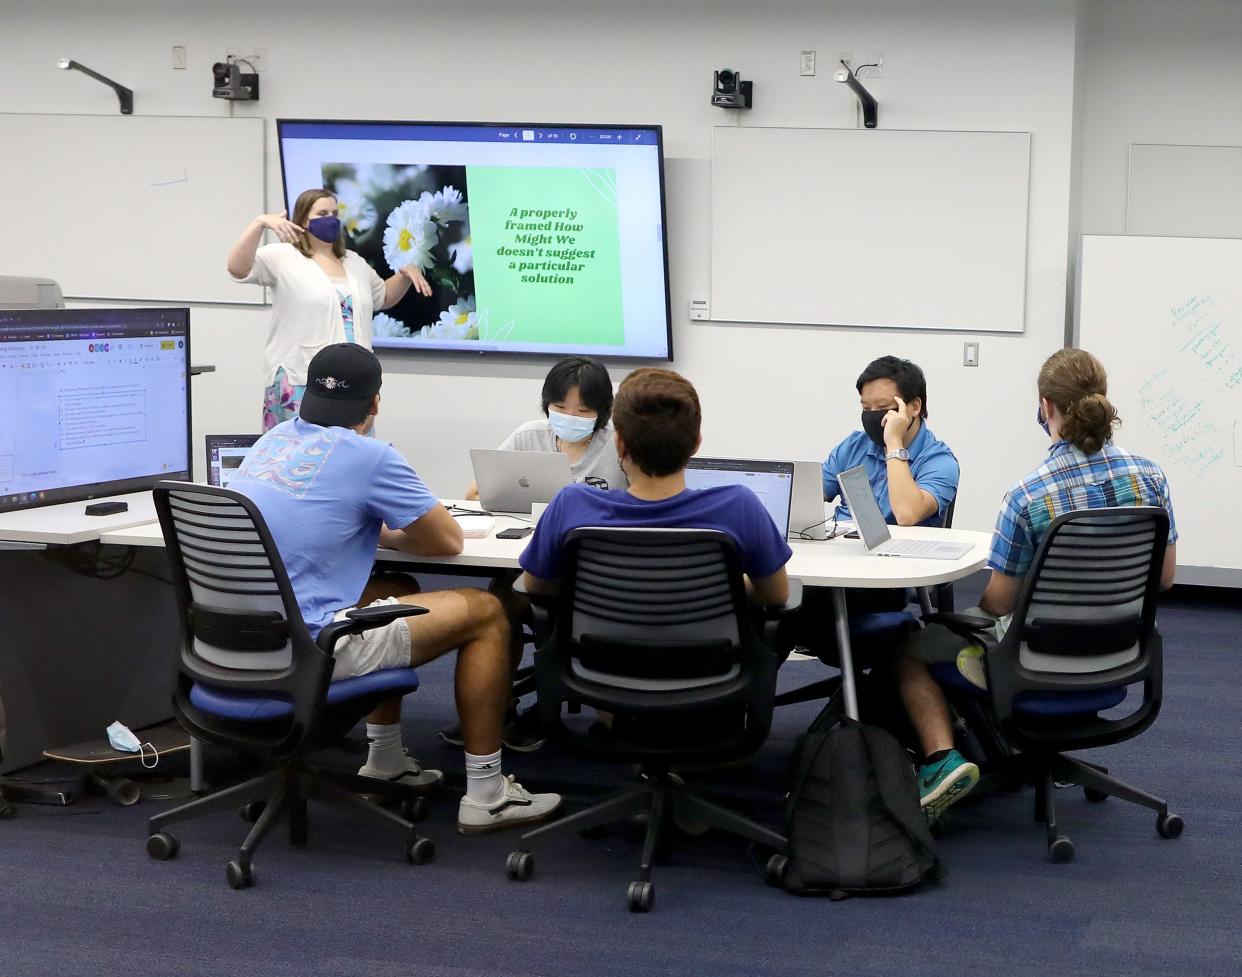 Students are seen in class during the dedication ceremony of new Herbert Wertheim Laboratory for Engineering Excellence building and labs at the University of Florida in Gainesville on Oct. 7.